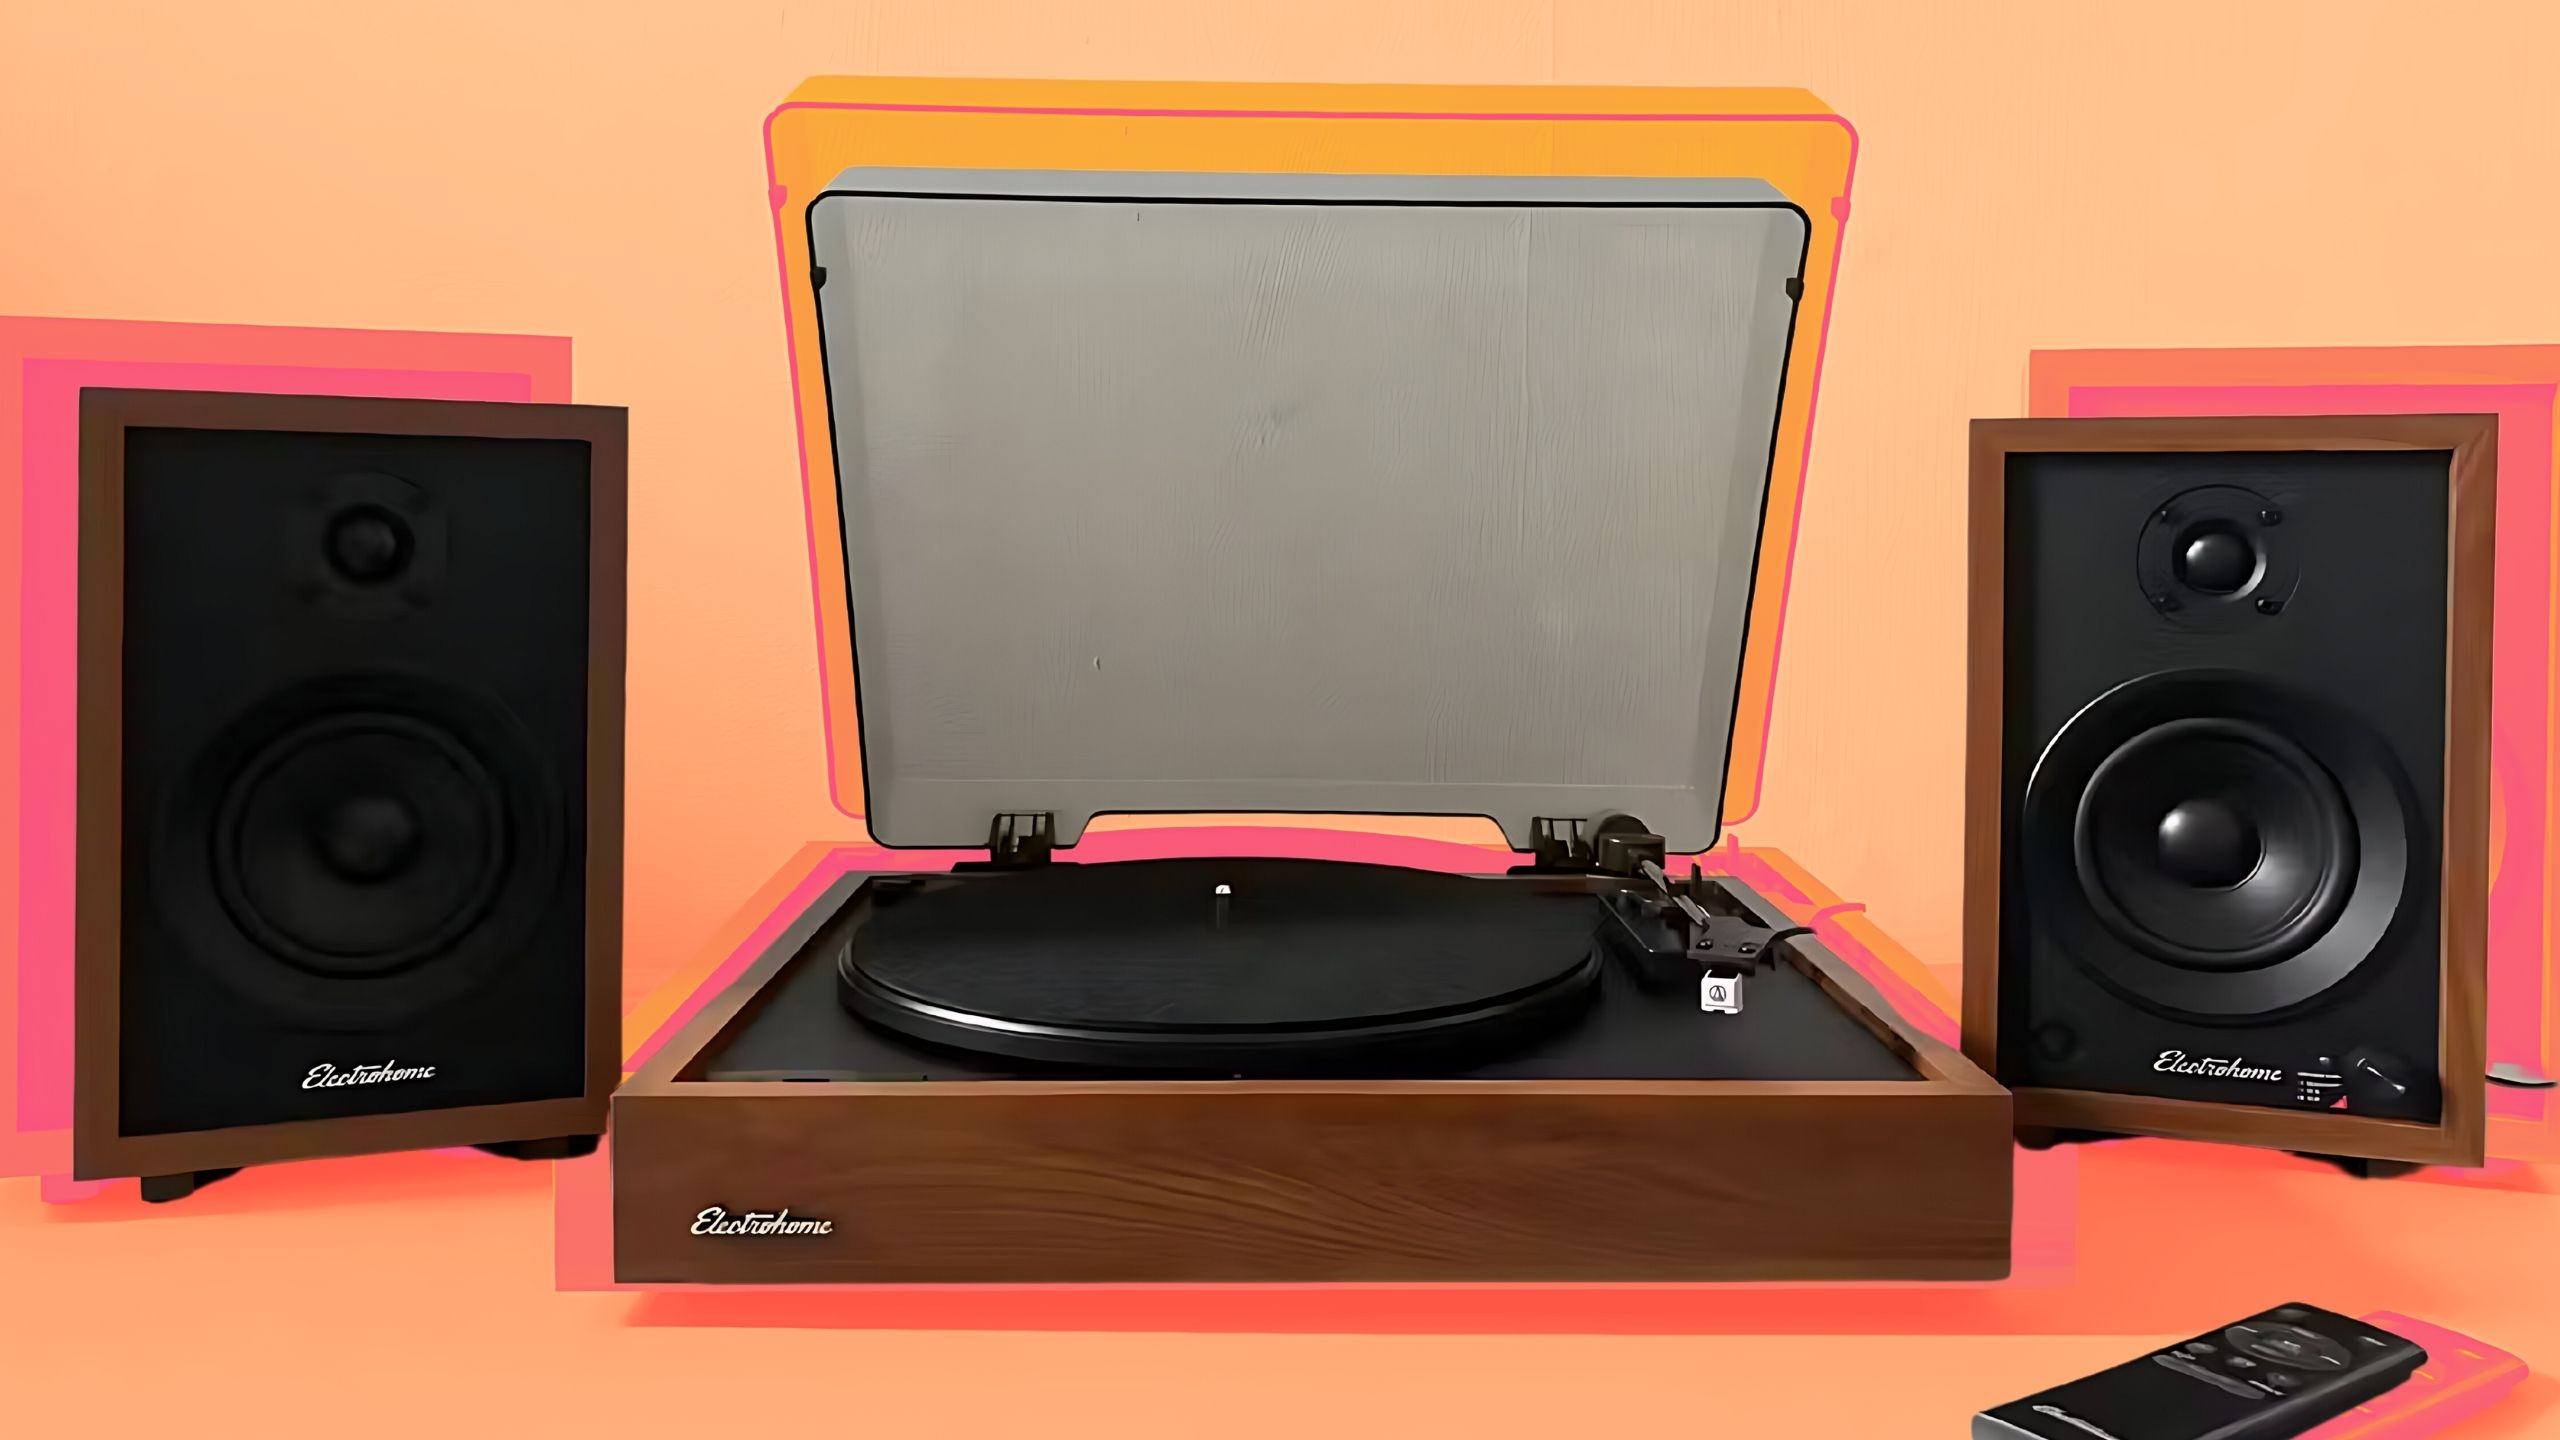 Montrose record player stereo system review: Vinatge sound, modern look